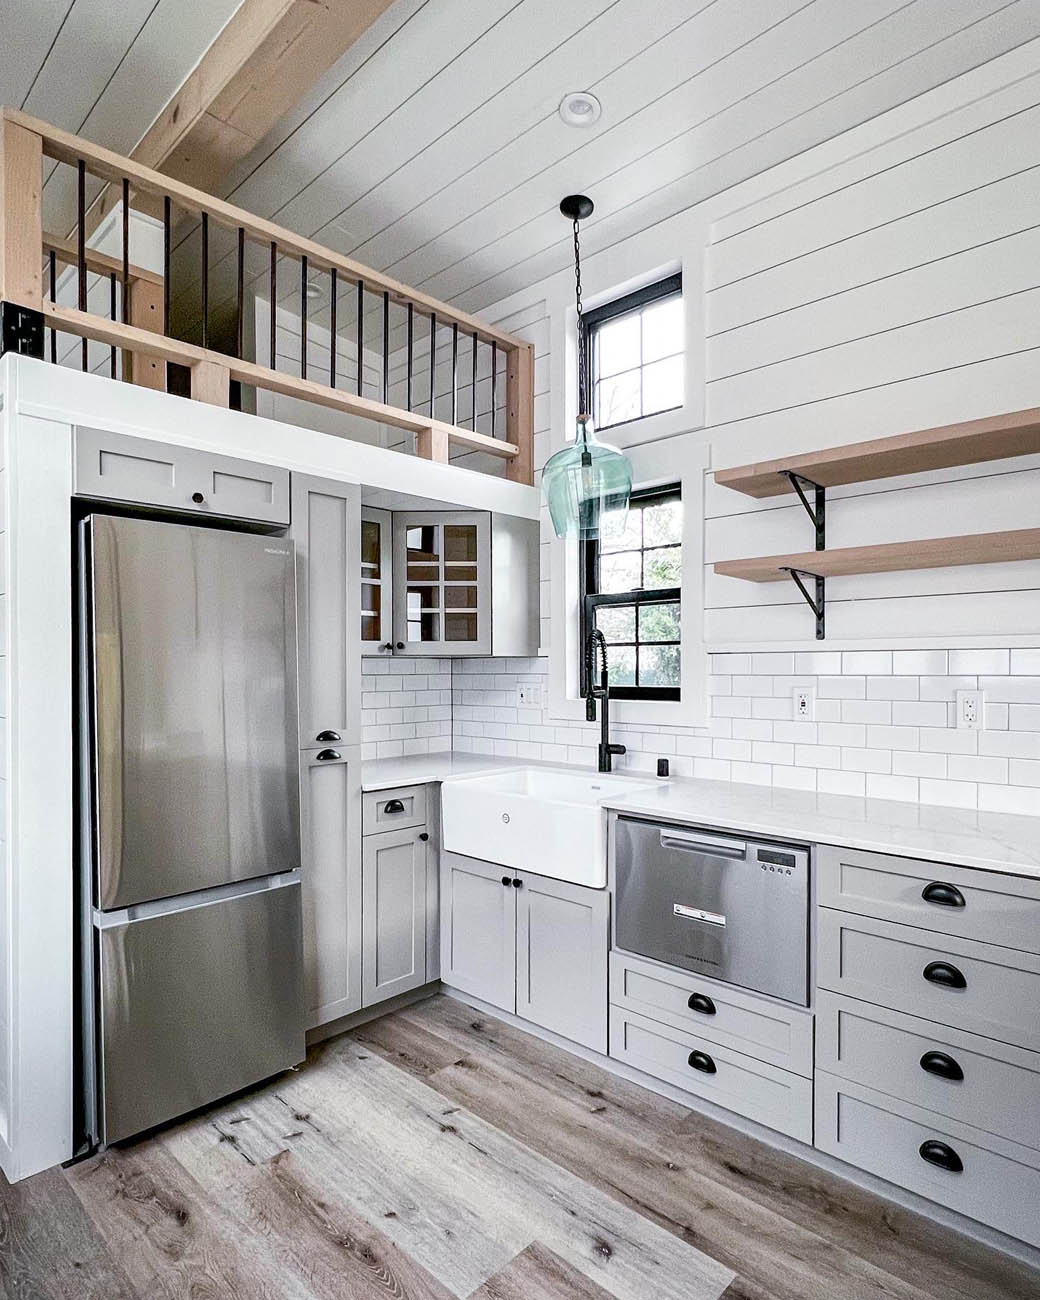 A Anchored Tiny Homes modern tiny home, build by our custom small home builder in Portland.